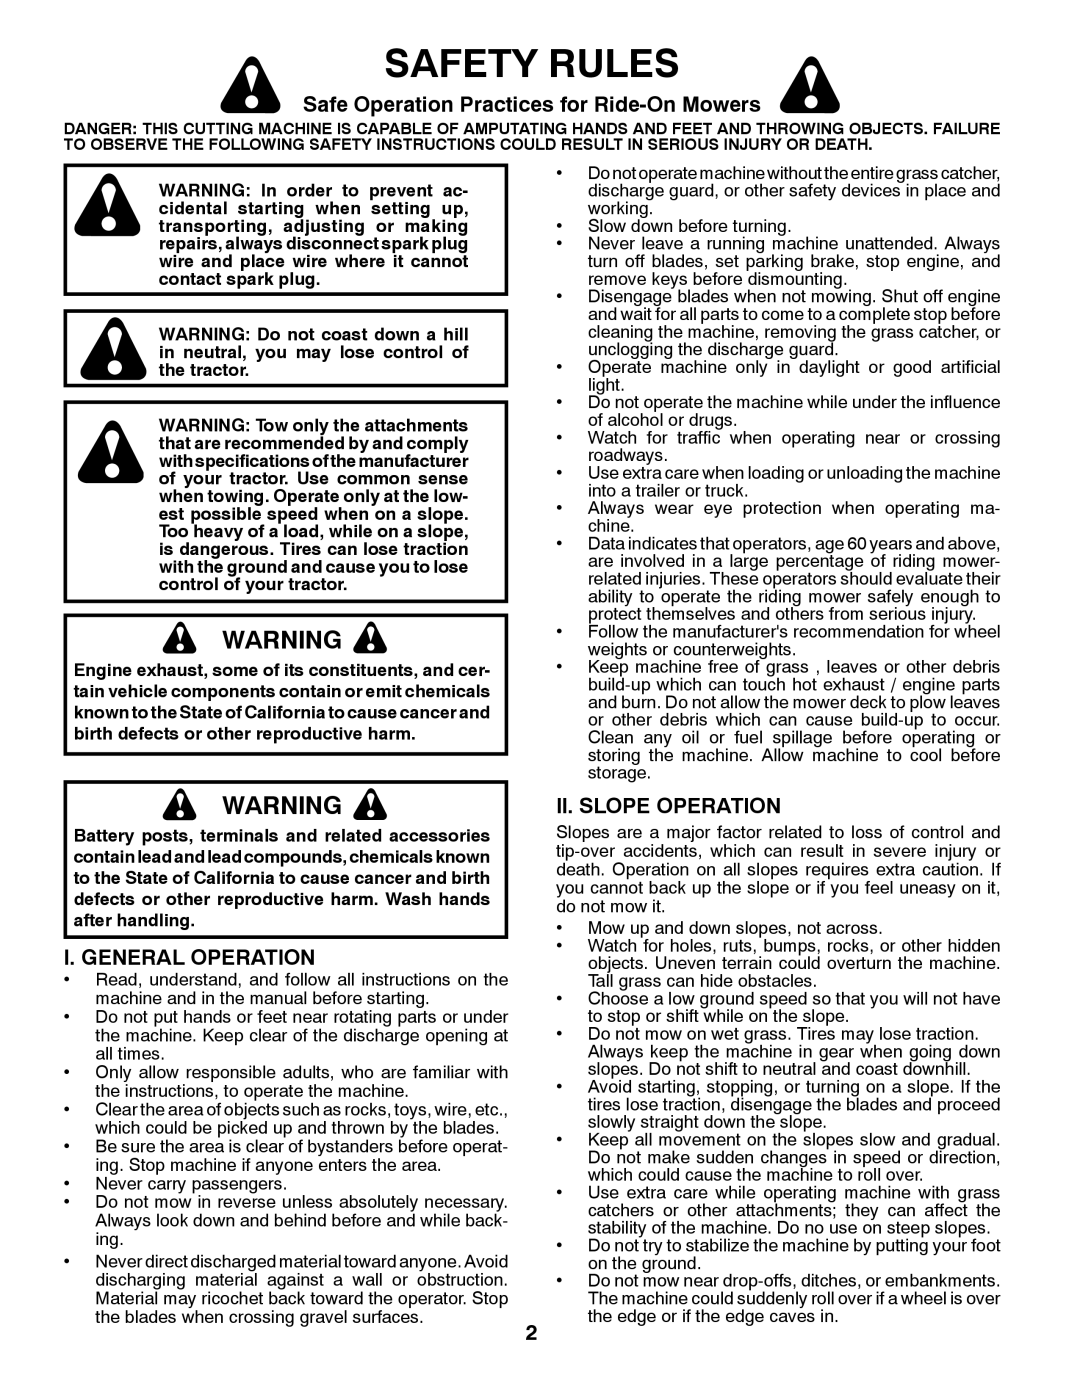 Husqvarna 96045000410 Safety Rules, Safe Operation Practices for Ride-On Mowers, I. General Operation, Ii. Slope Operation 